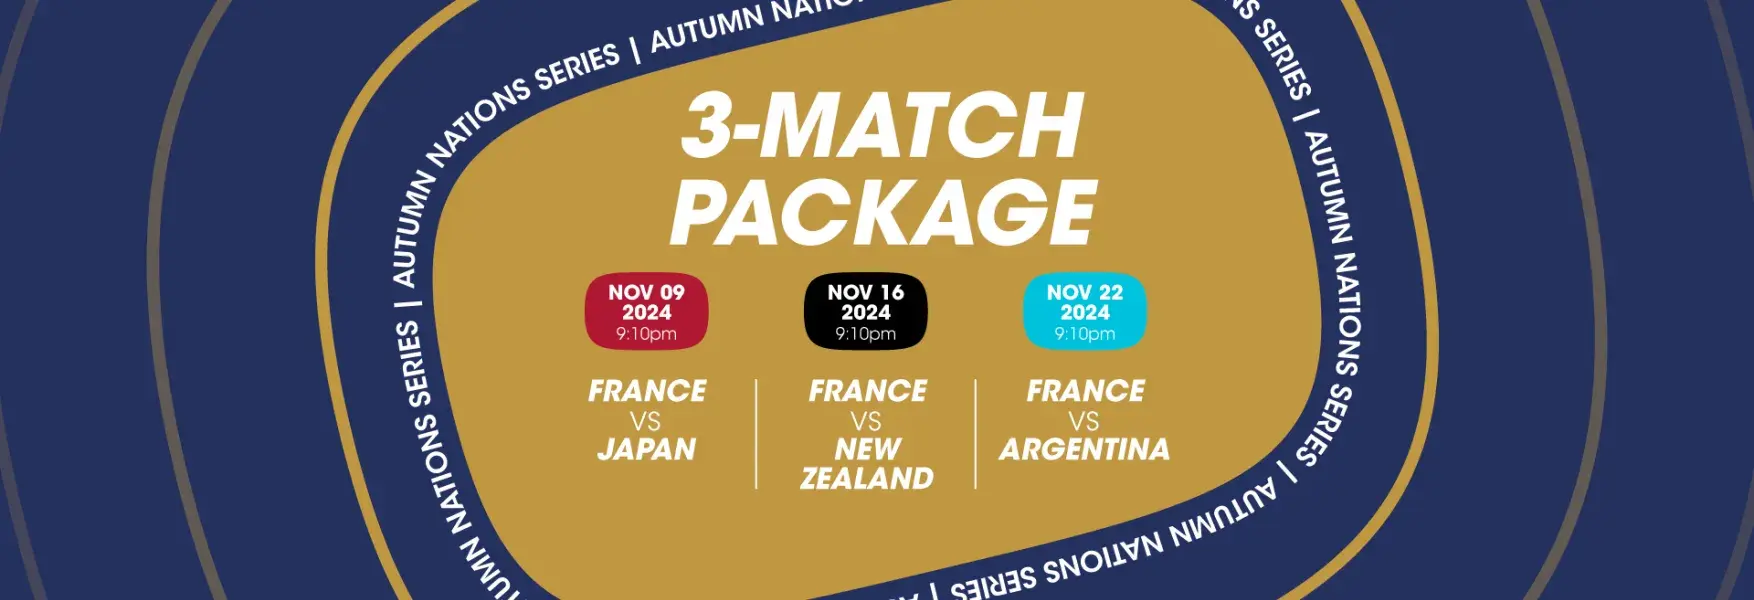 autumn_nations_series_2024_3_match_package_rugby_vip_tickets_hospitality_banner_1320x292